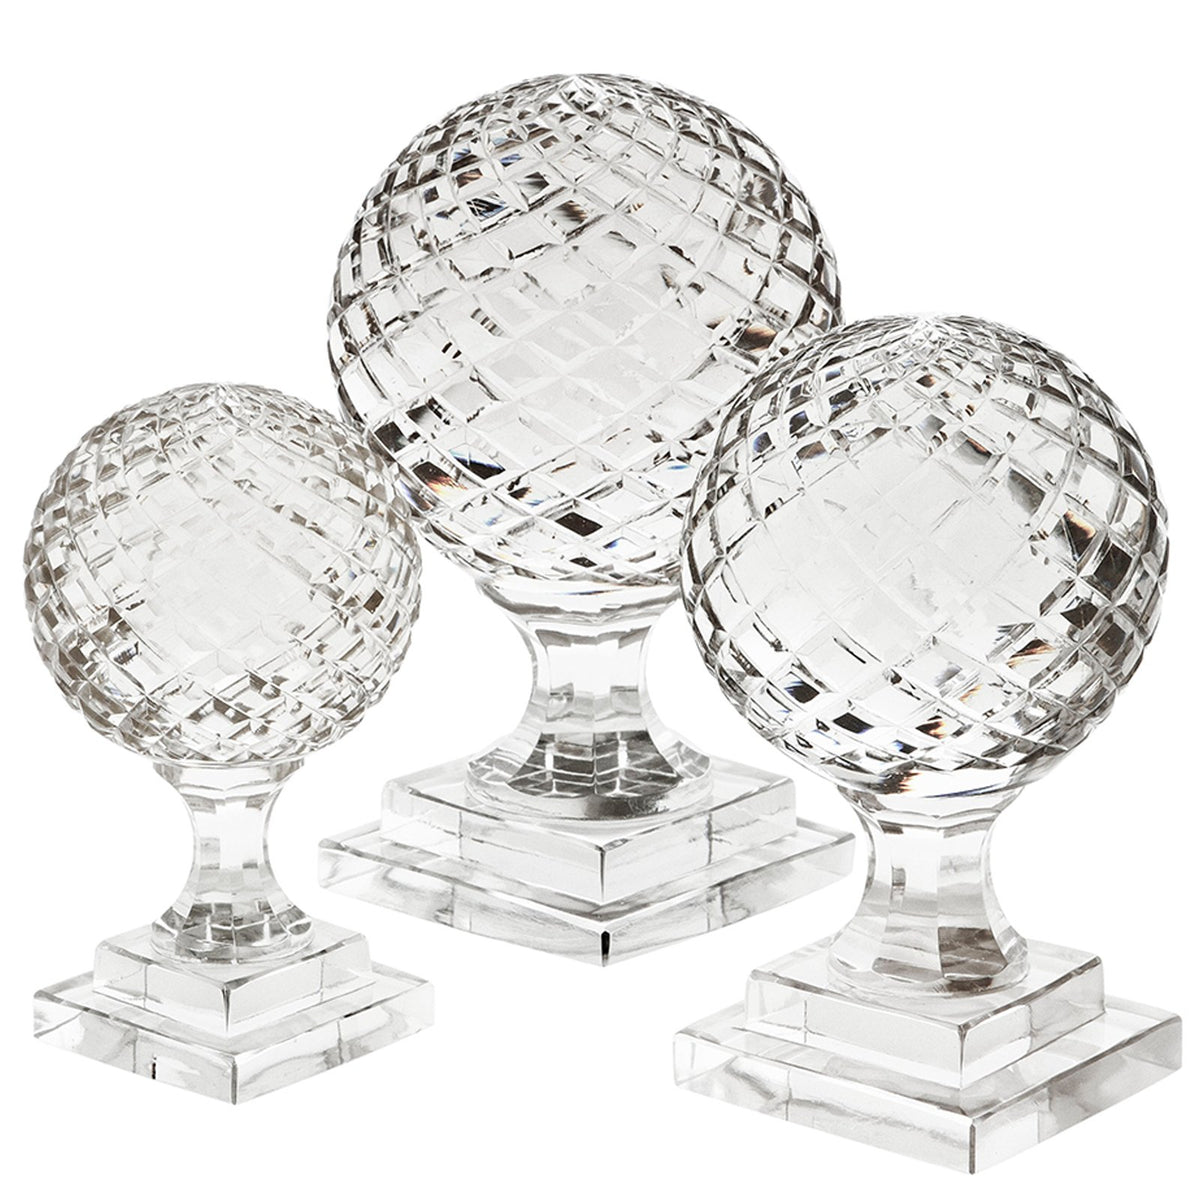 Arabesque Glass Objects, Set of 3